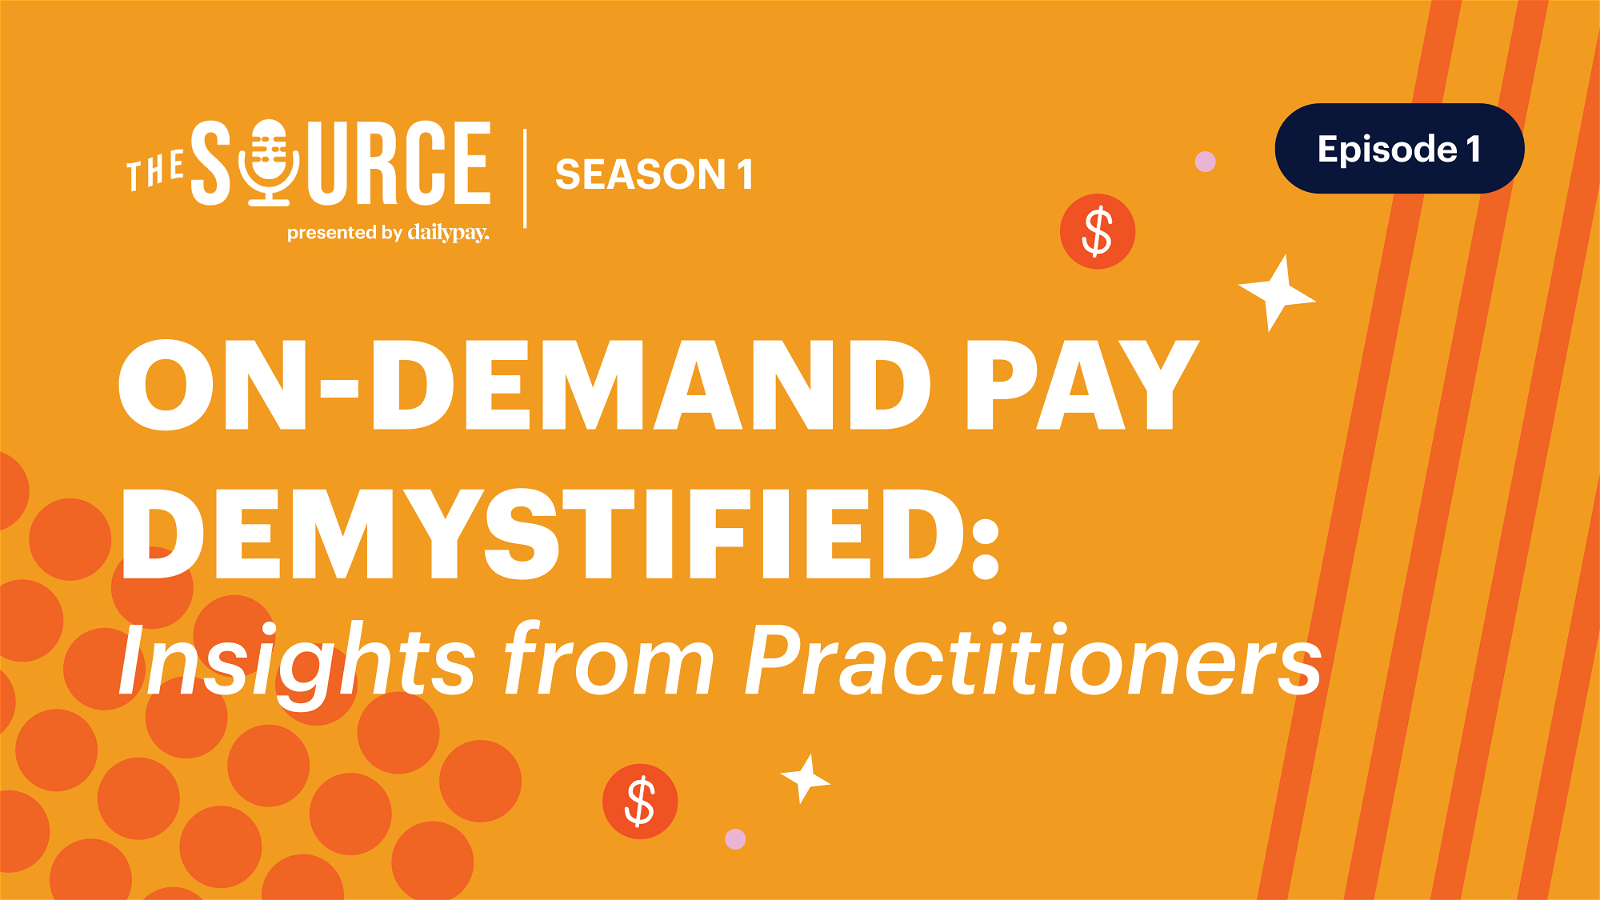 An orange background image with text promoting a podcast titled "The Source" presented by DailyPay. The banner reads "Season 1, Episode 1". The main text says "On-Demand Pay Demystified: Insights from Practitioners." The background includes scattered dollar signs and abstract shapes.